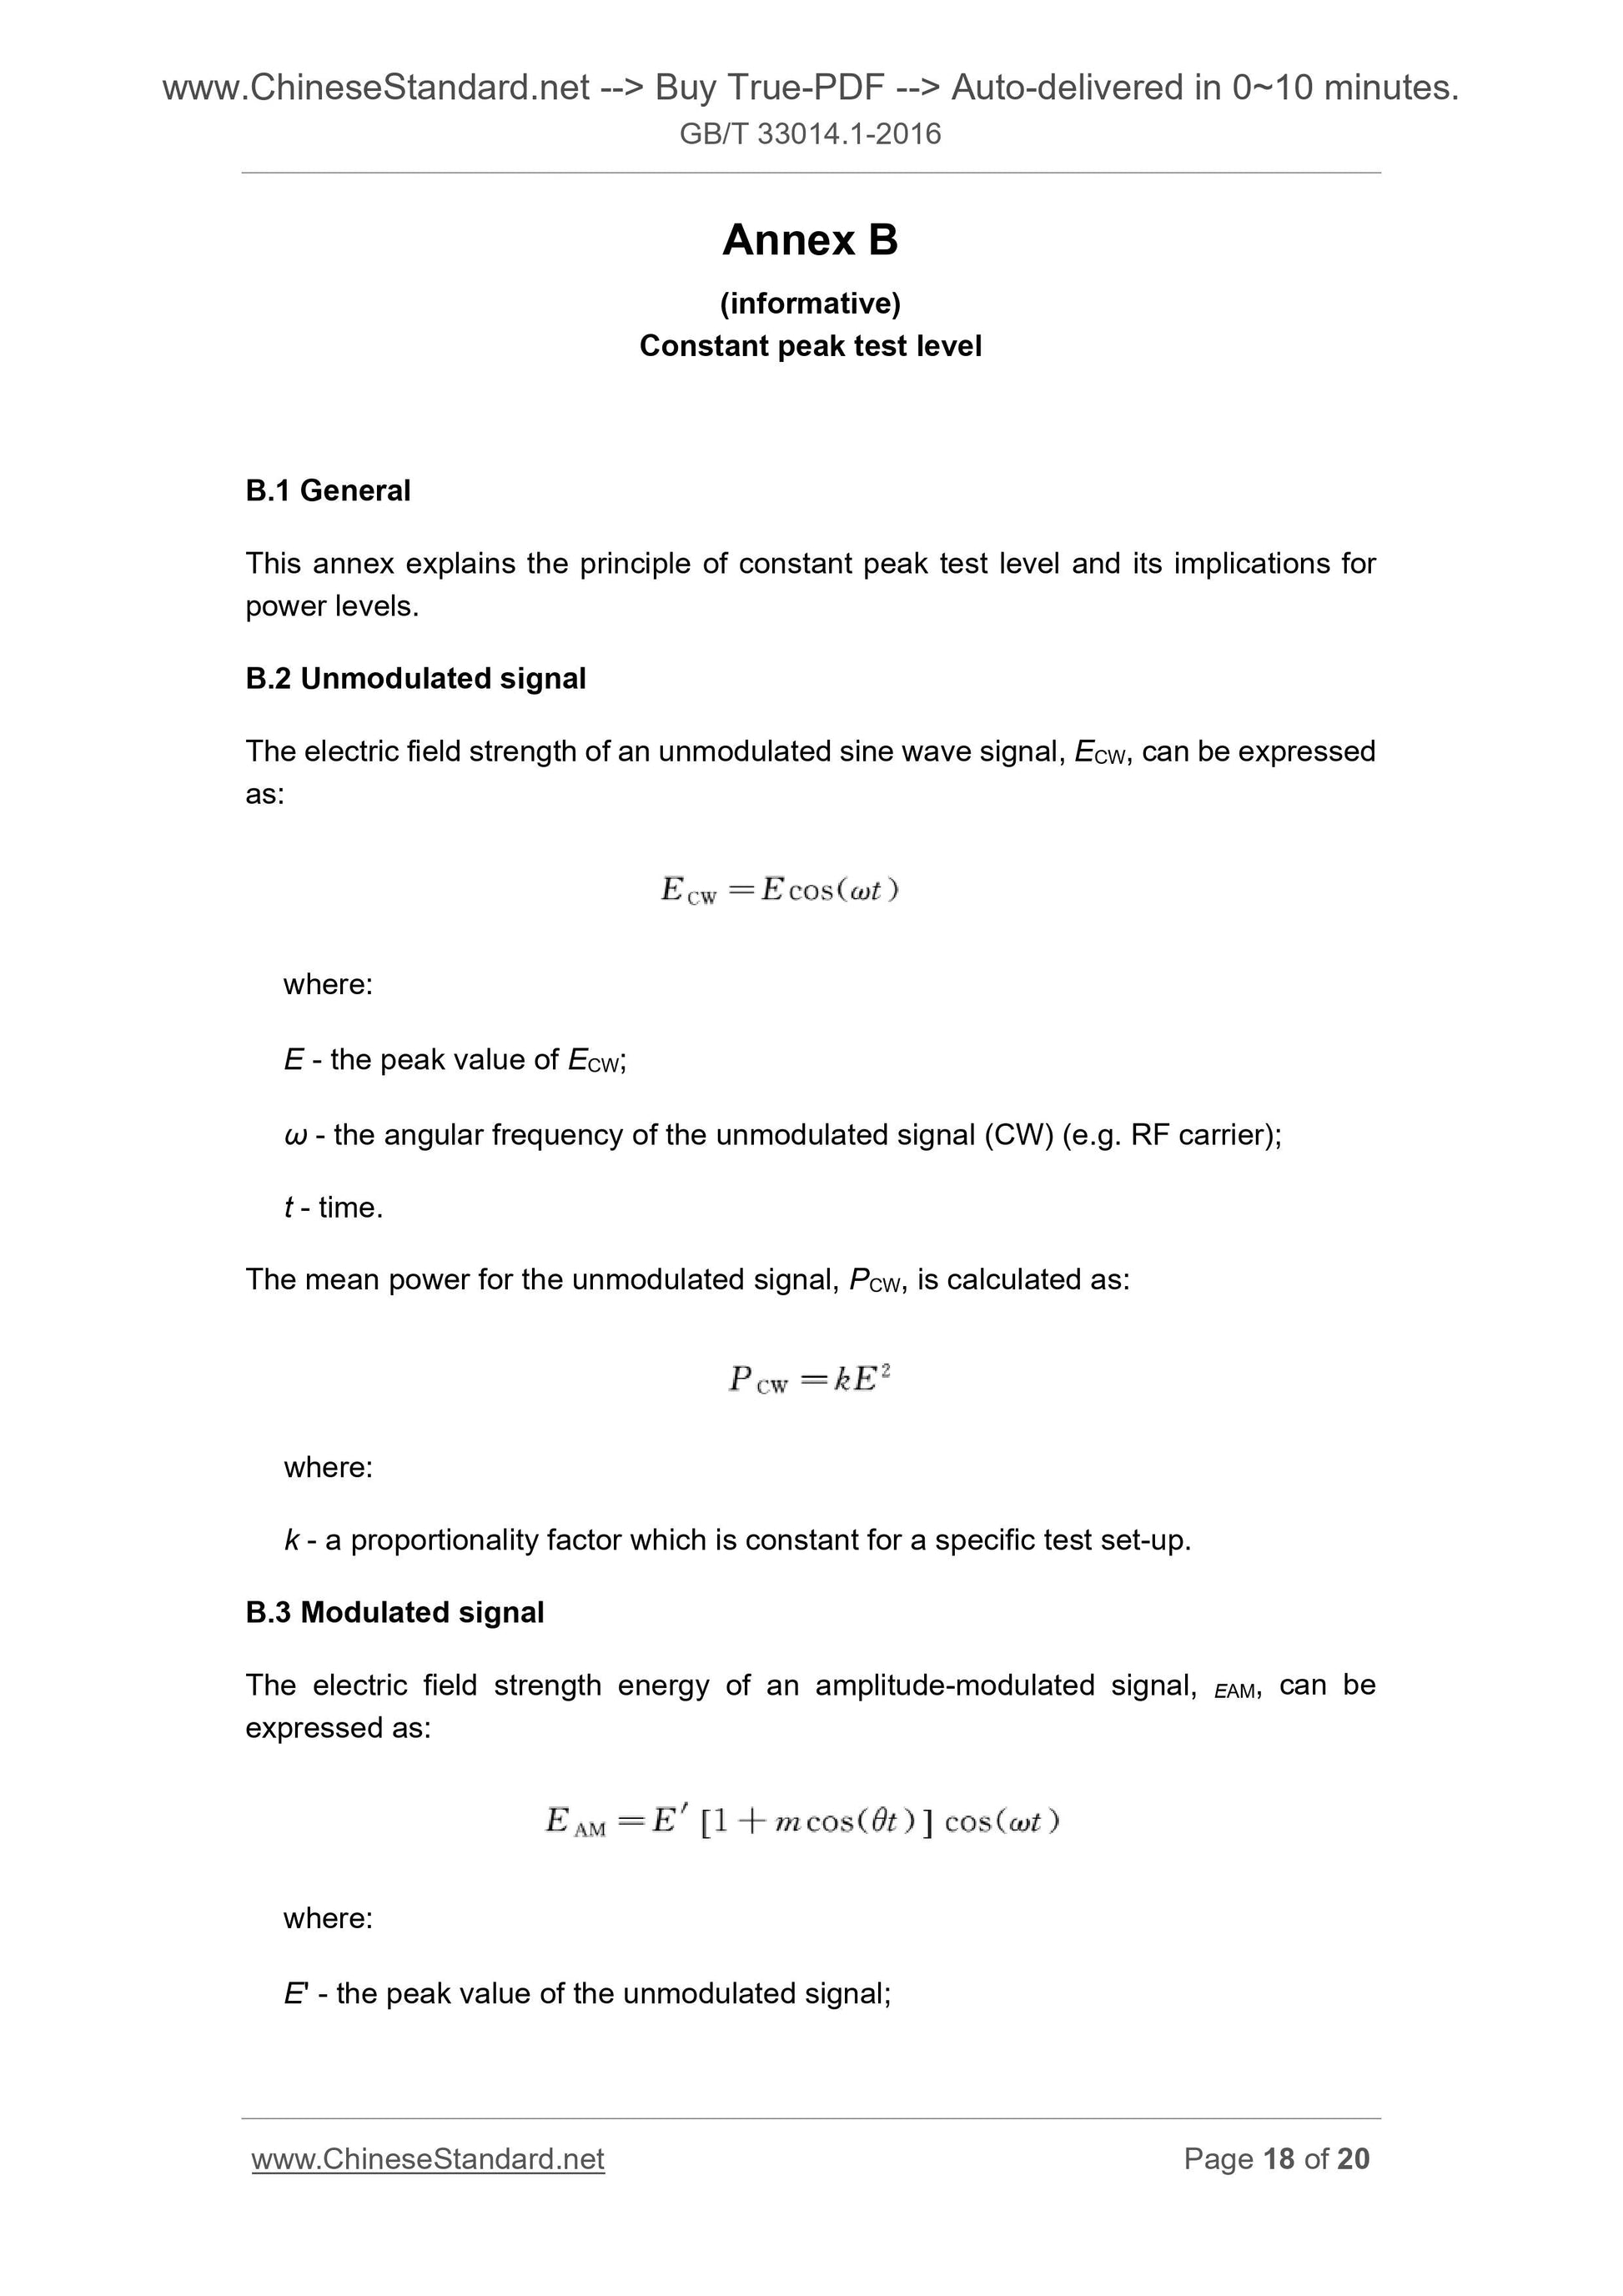 GB/T 33014.1-2016 Page 7